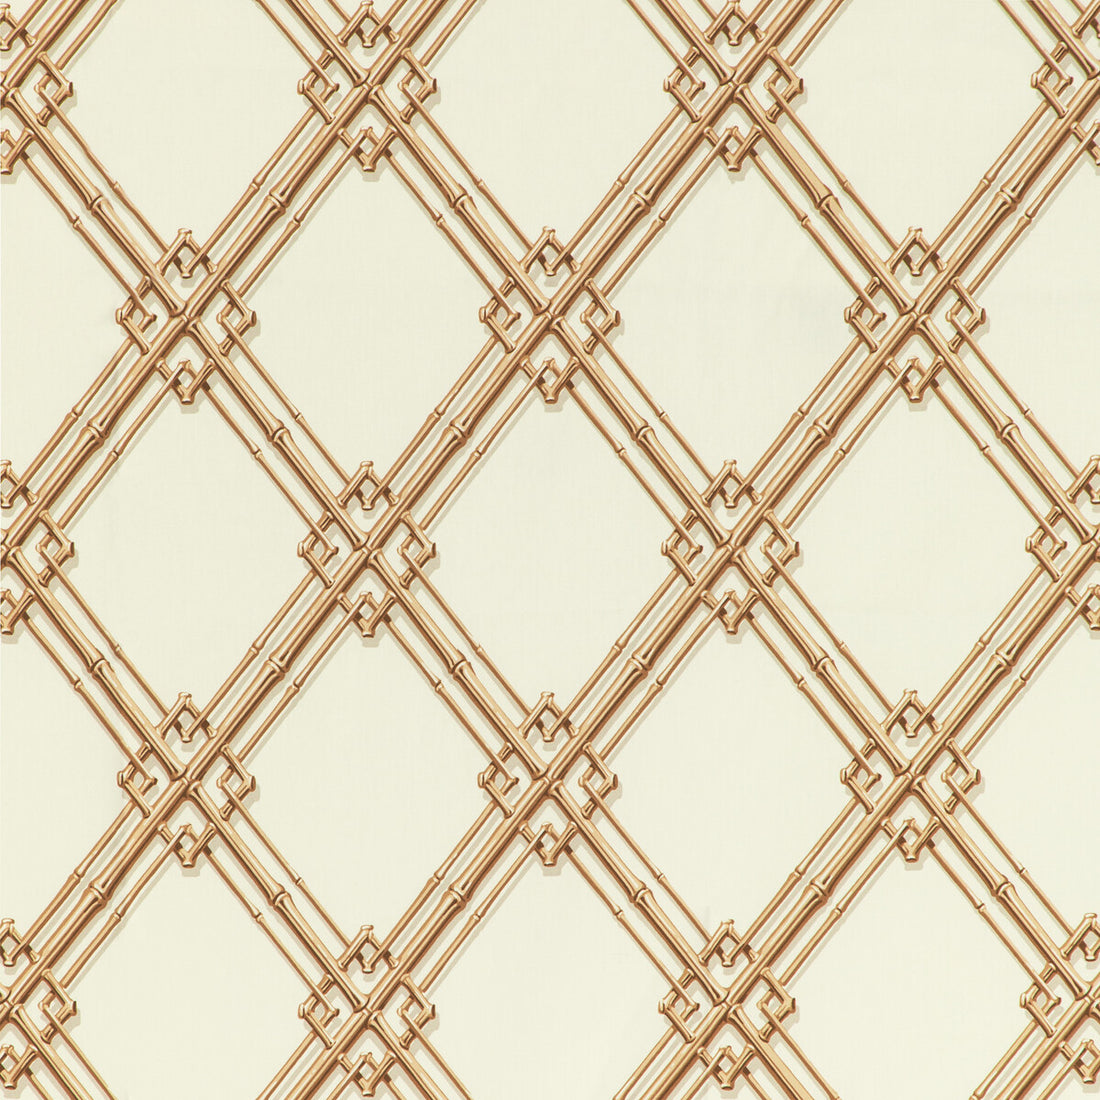 Le Bambou Print fabric in gold color - pattern 8020127.4.0 - by Brunschwig &amp; Fils in the Louverne collection